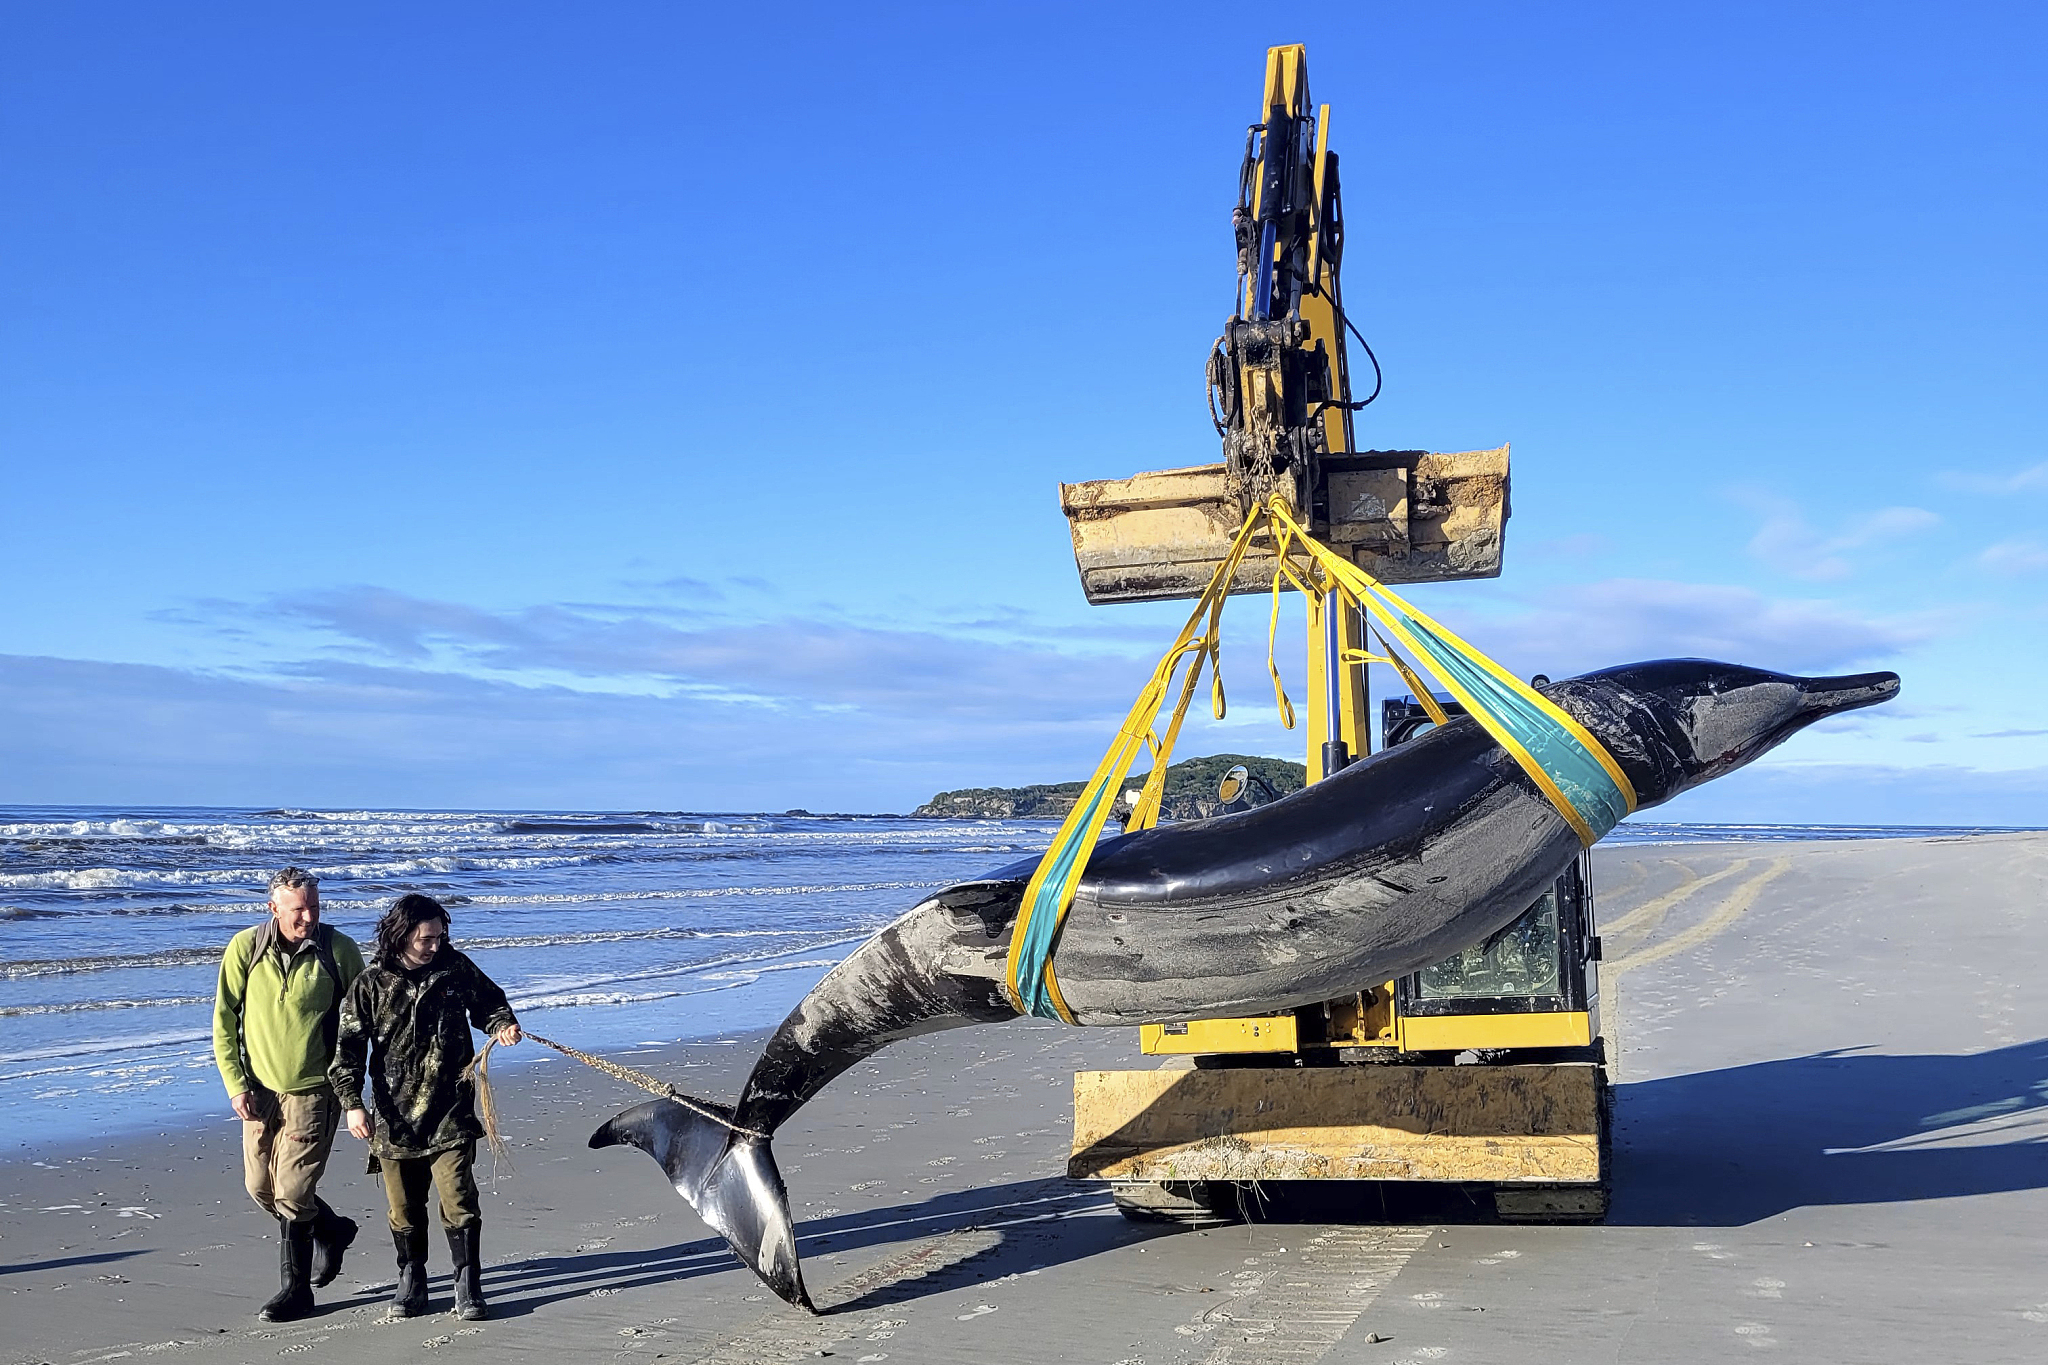 Rangers walk alongside what is believed to be a rare spade-toothed whale as its body is suspended by a crane on a beach in Otago, New Zealand, July 5, 2024. /CFP